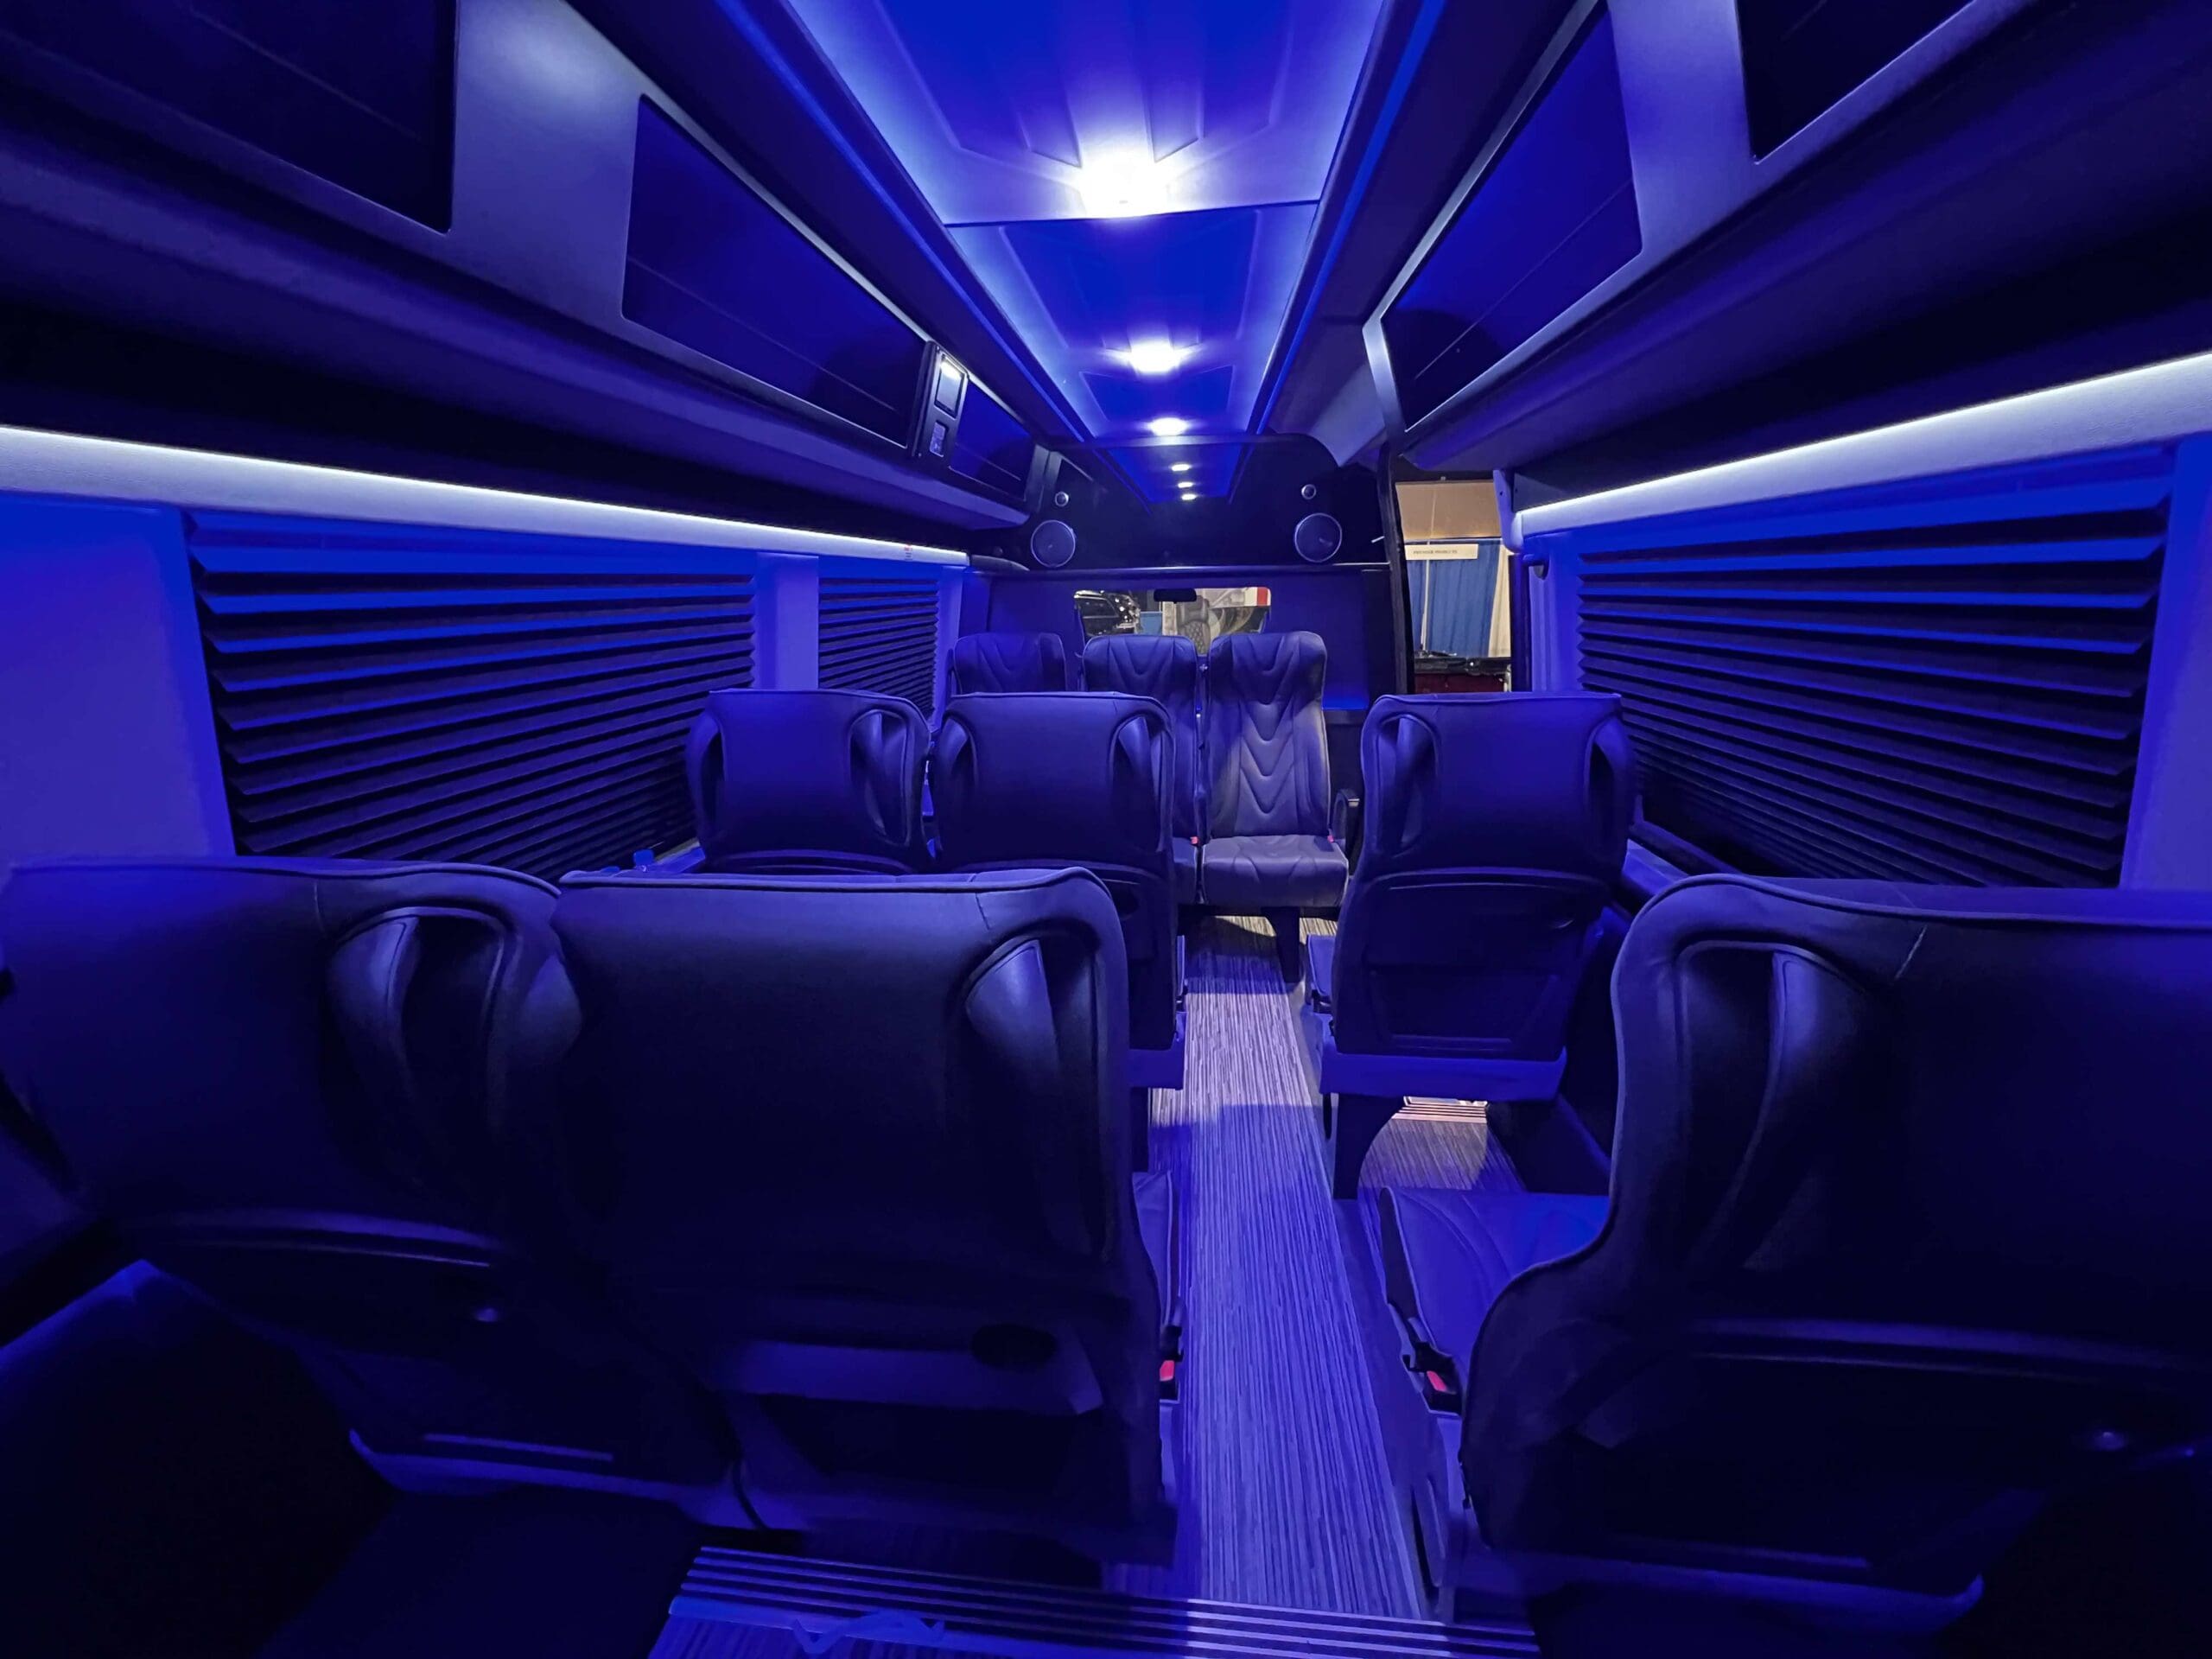 Golden Limo Executive Sprinter Shuttle, interior view from back row of seating with blue LED lights illuminating passenger cabin